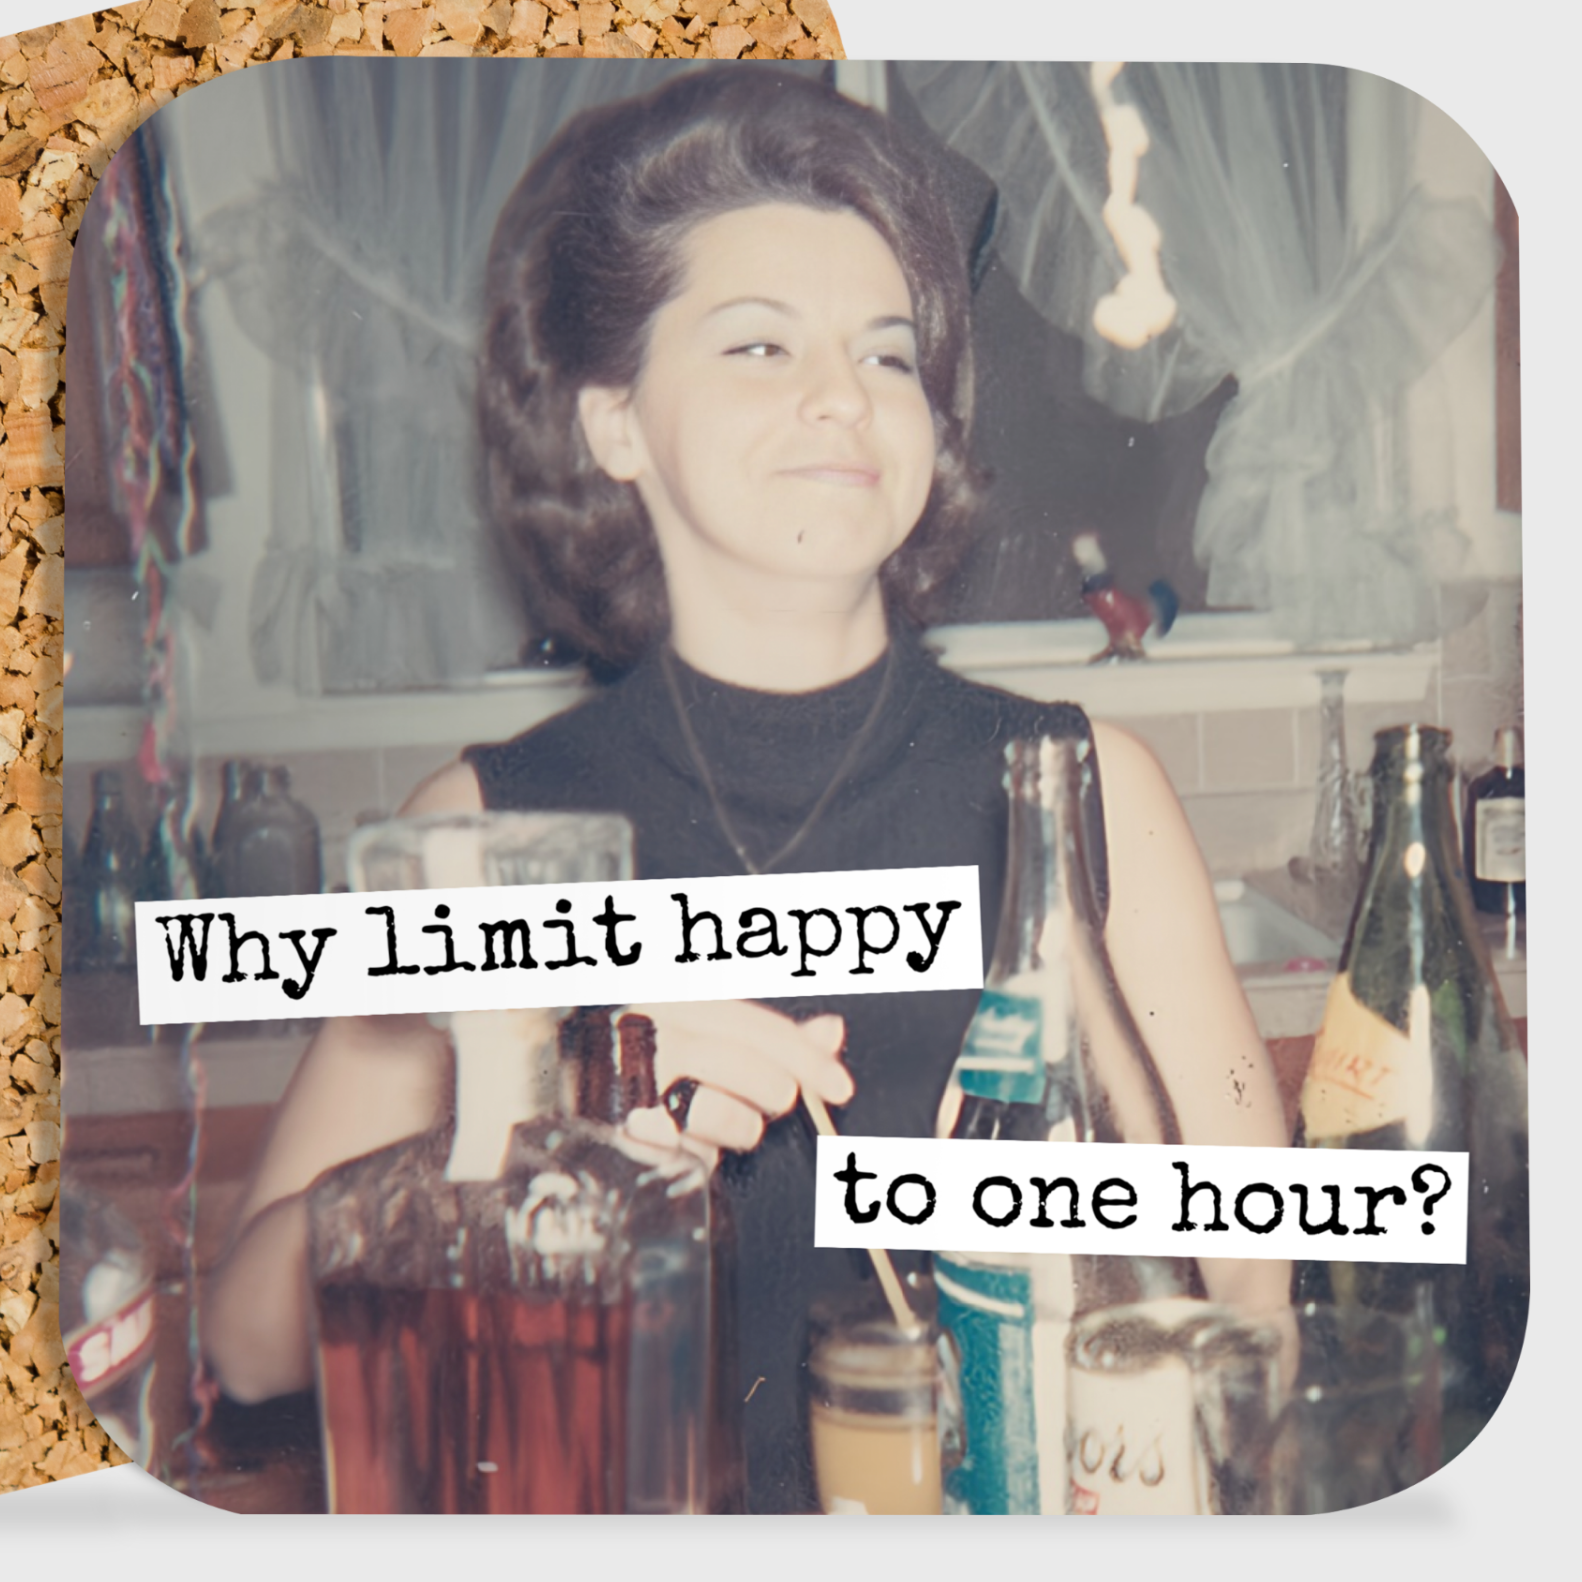 COASTER. Why Limit Happy To One Hour? Funny Vintage Style.